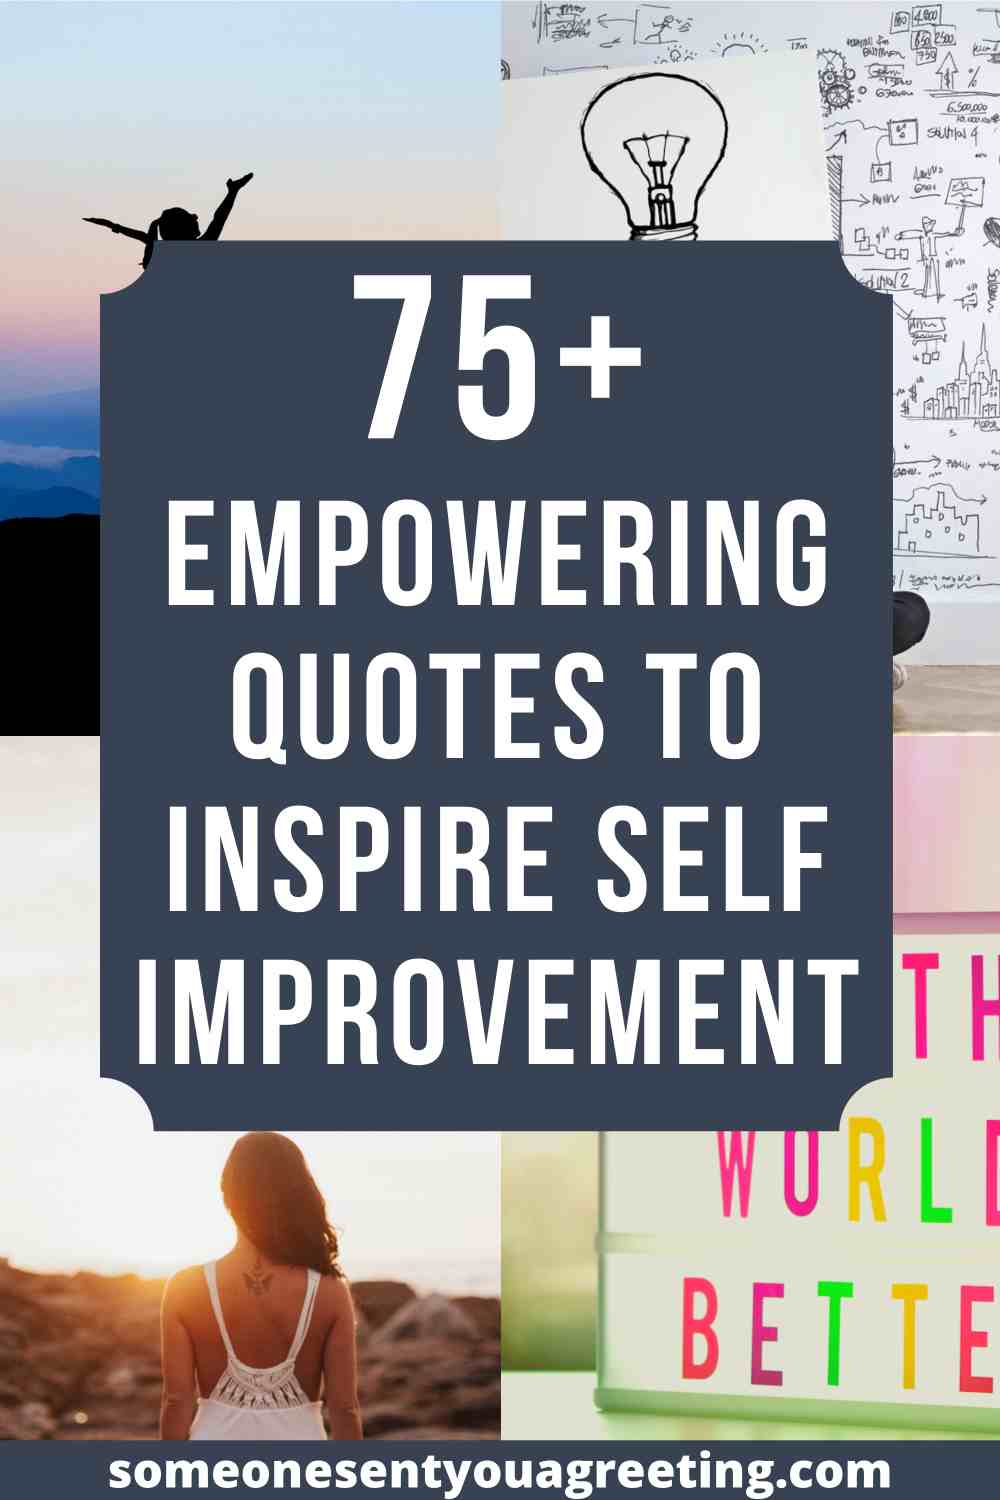 75+ Empowering Quotes to Inspire Self Improvement